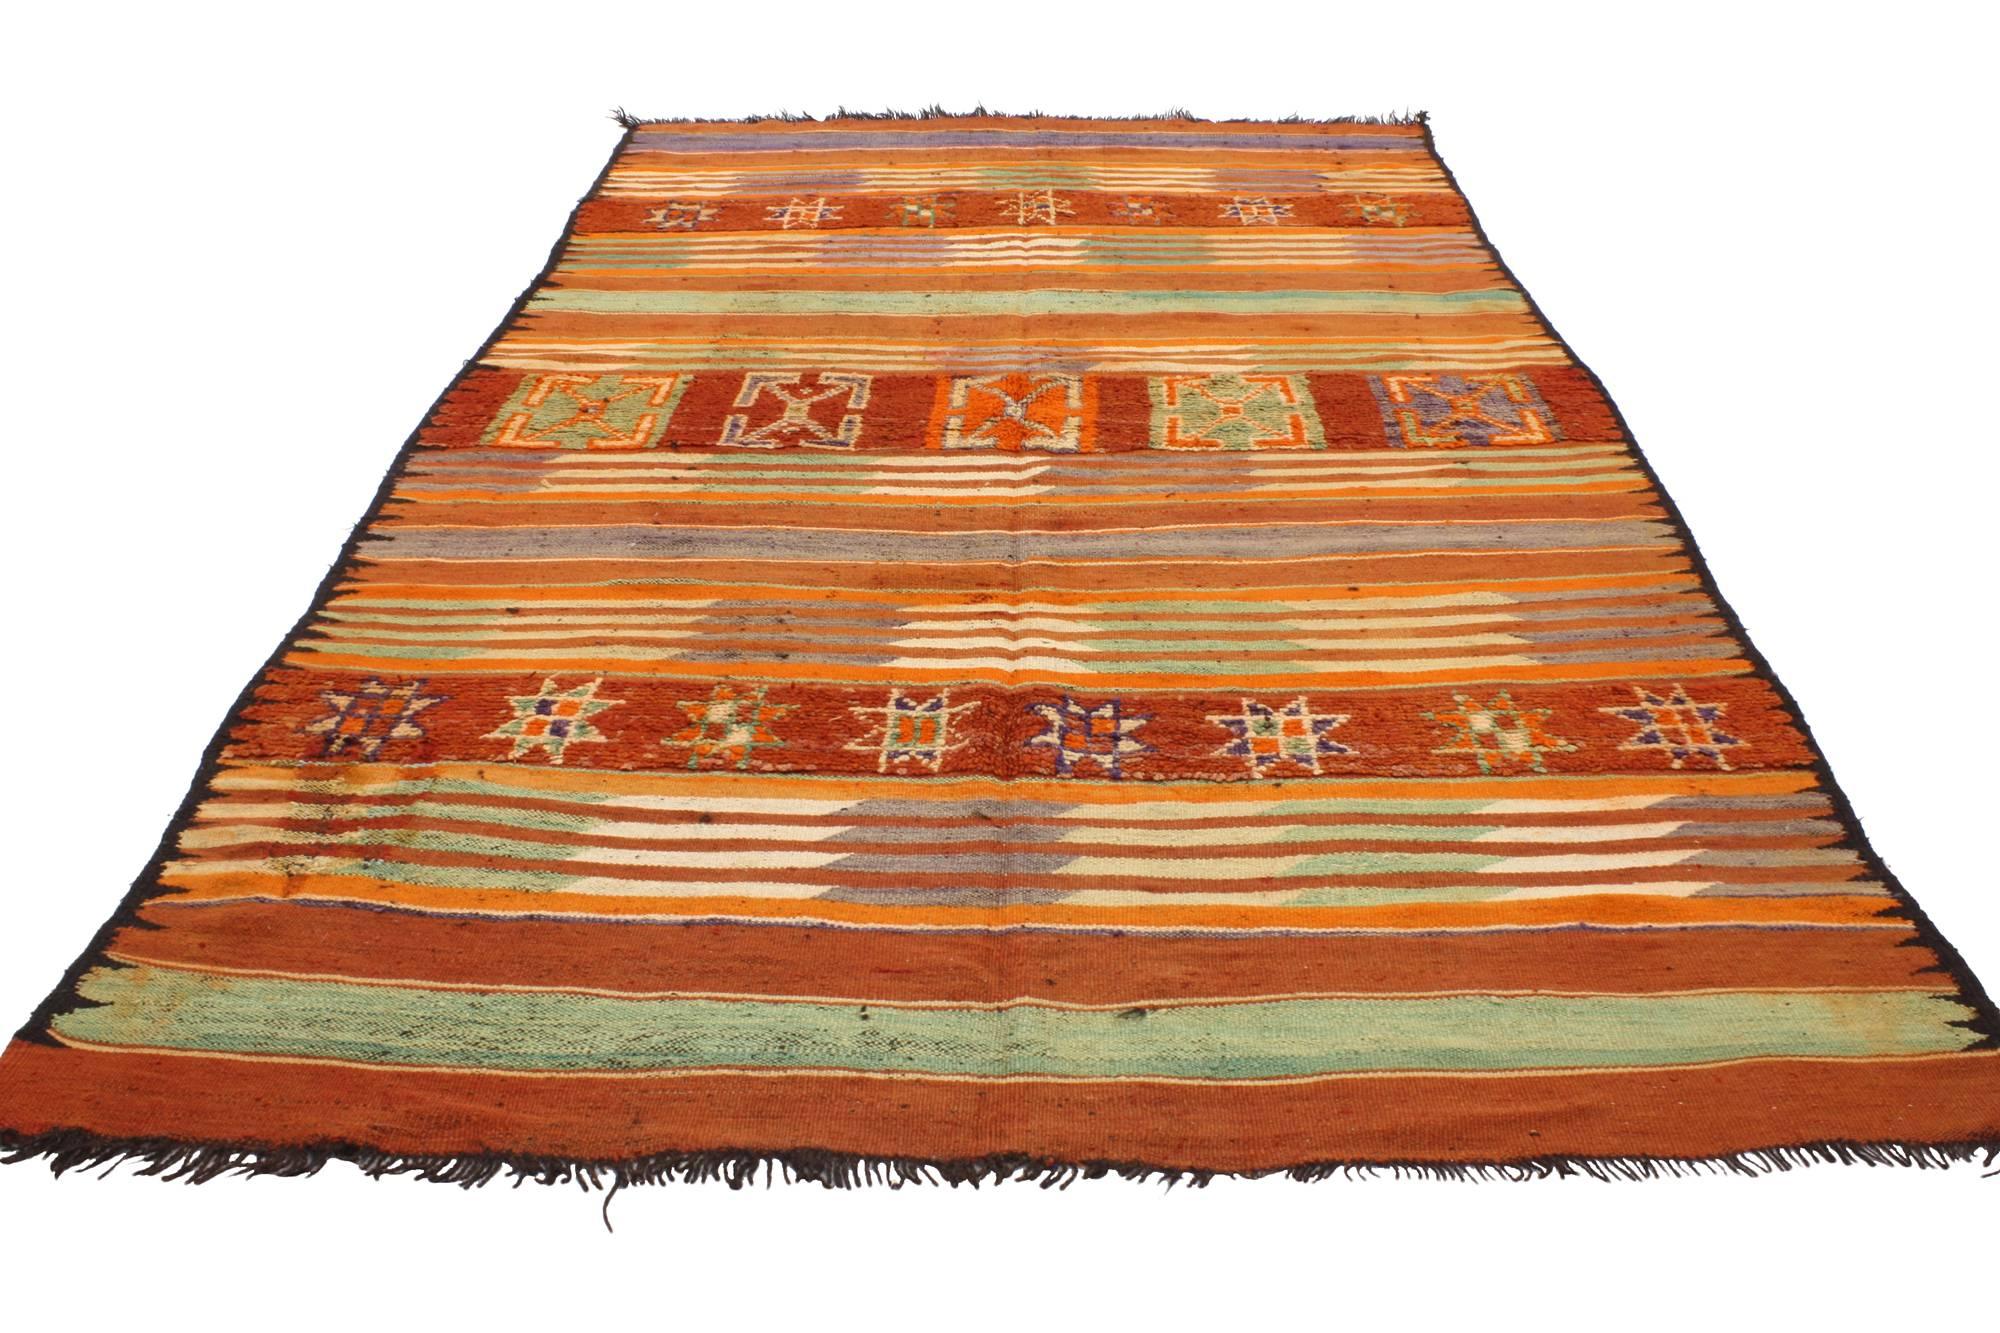 20th Century Vintage Berber Moroccan Kilim Rug with Modern Cabin Style, Flat-weave Kilim Rug For Sale